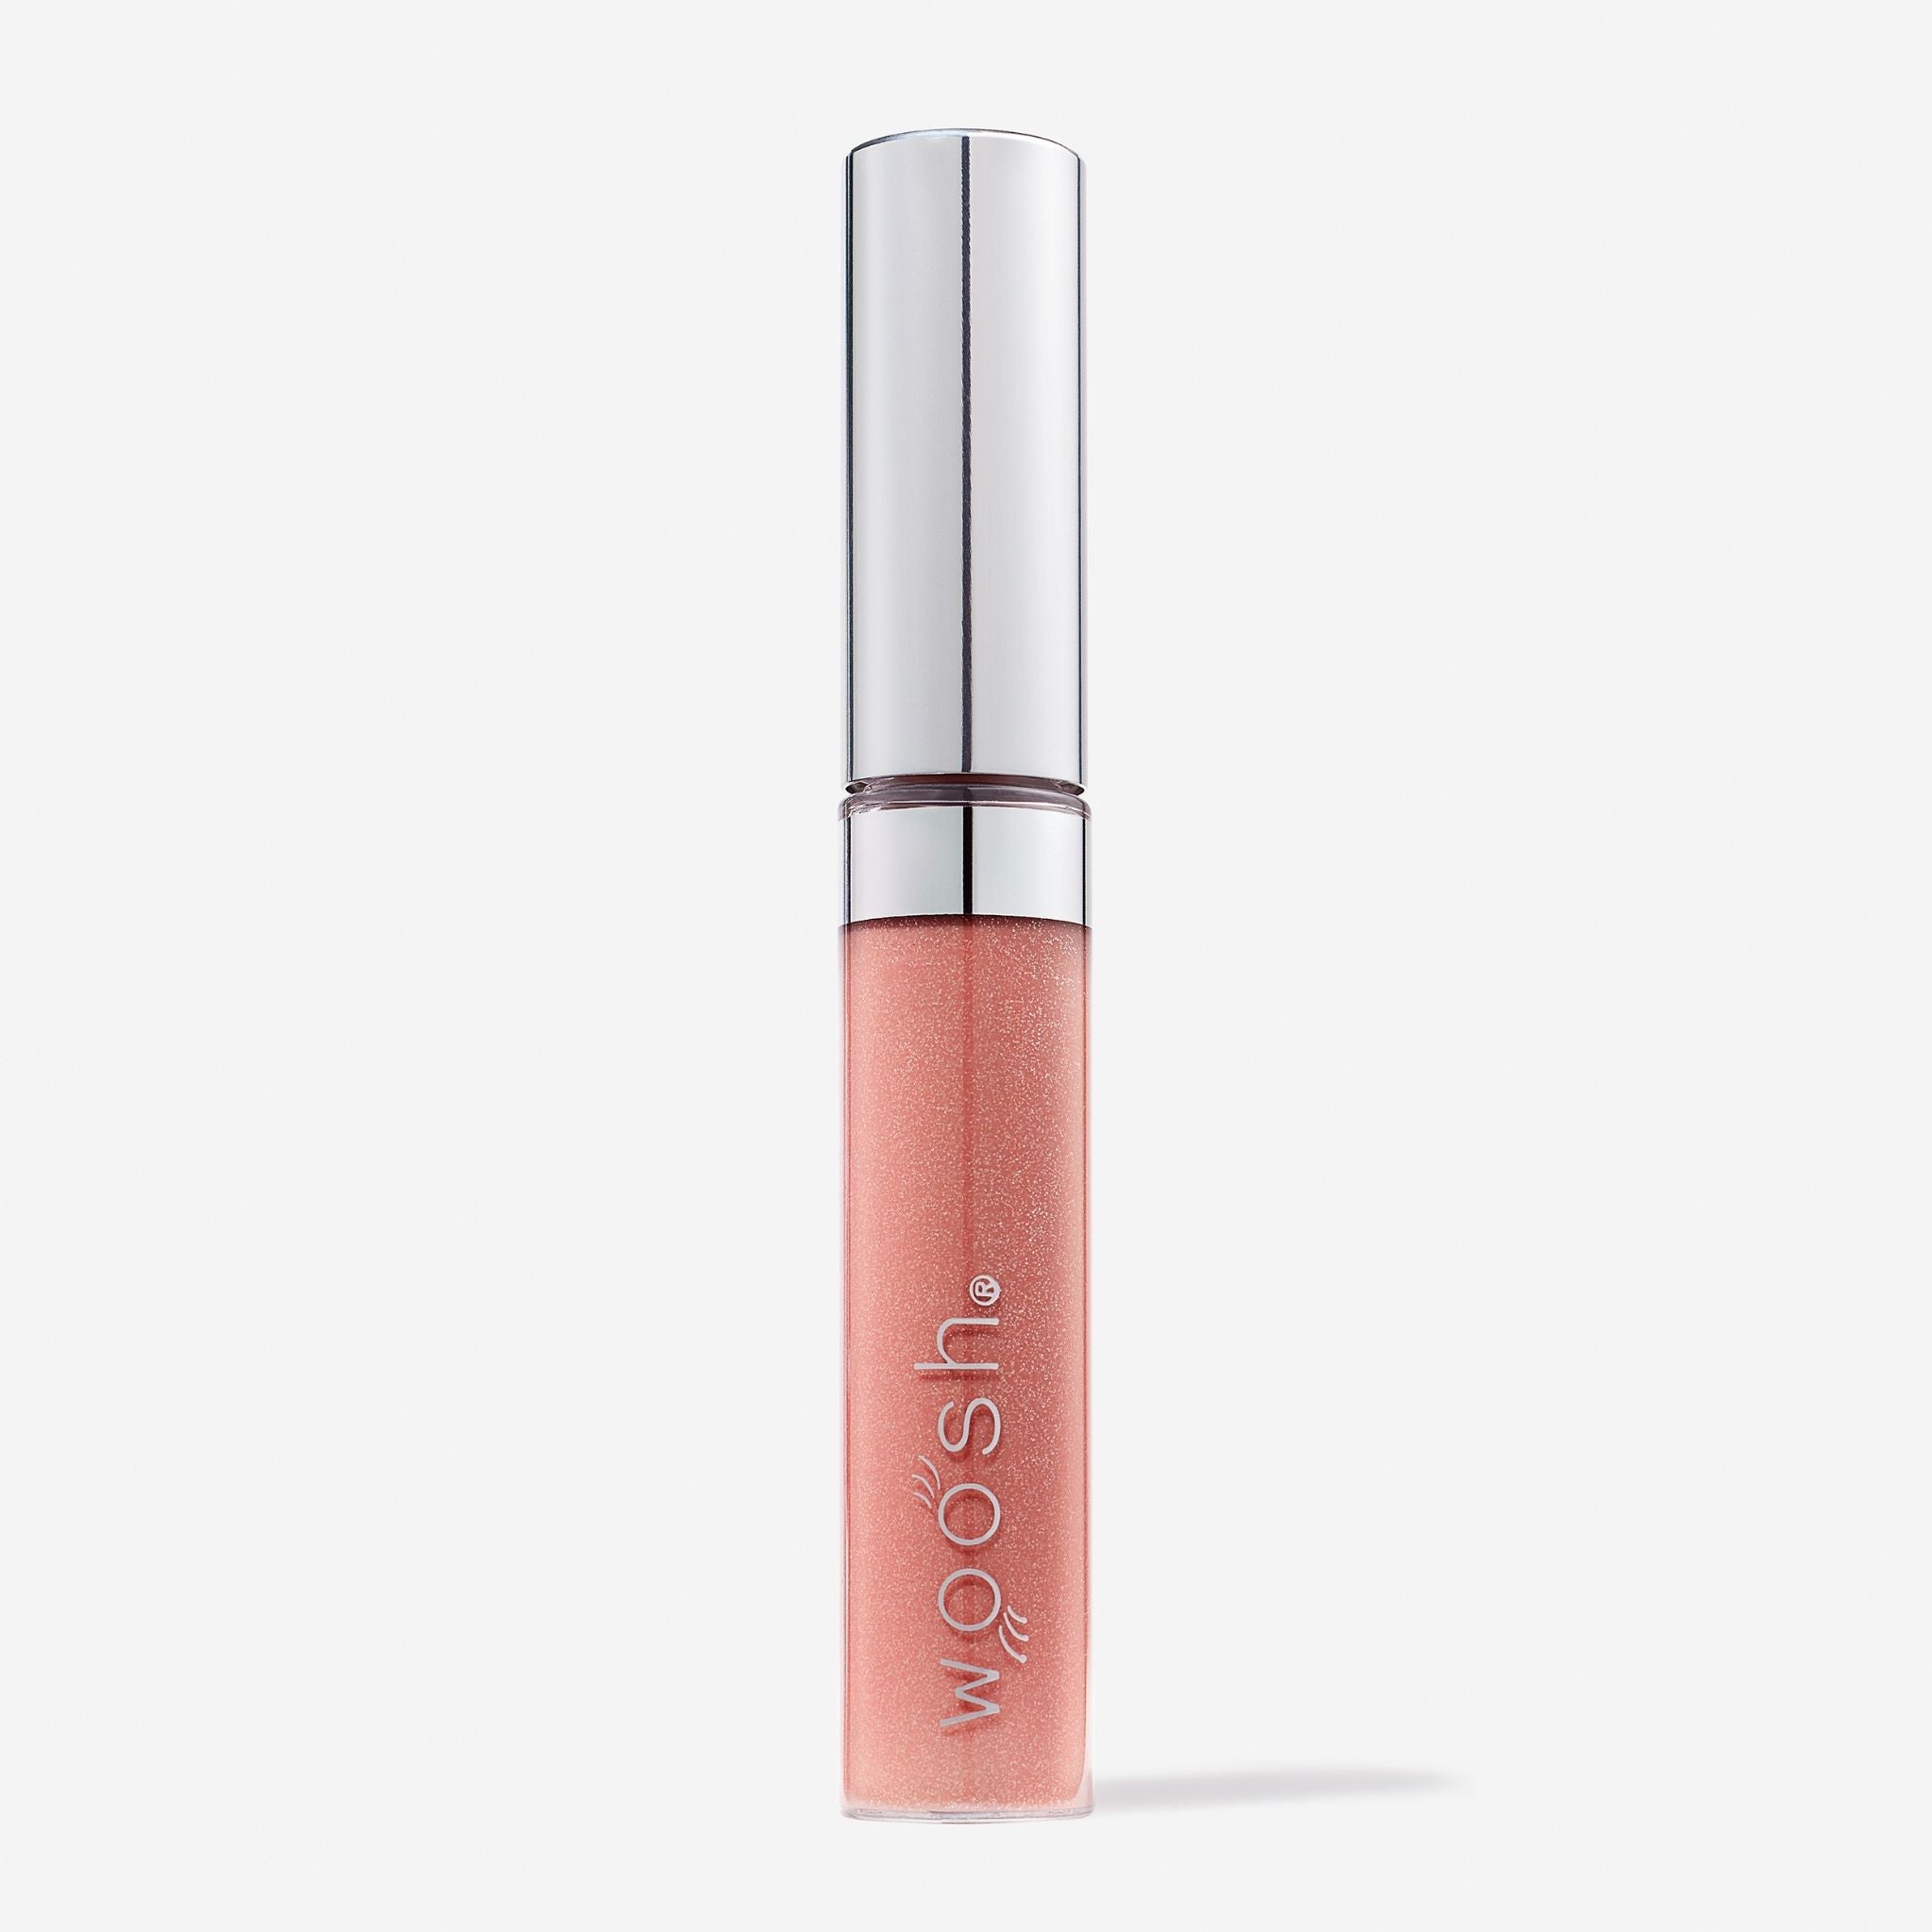 Vegan, moisturizing, shea butter, hyaluronic acid, Glam Peach / Glimmer spin on lip gloss by Woosh Beauty with shimmer